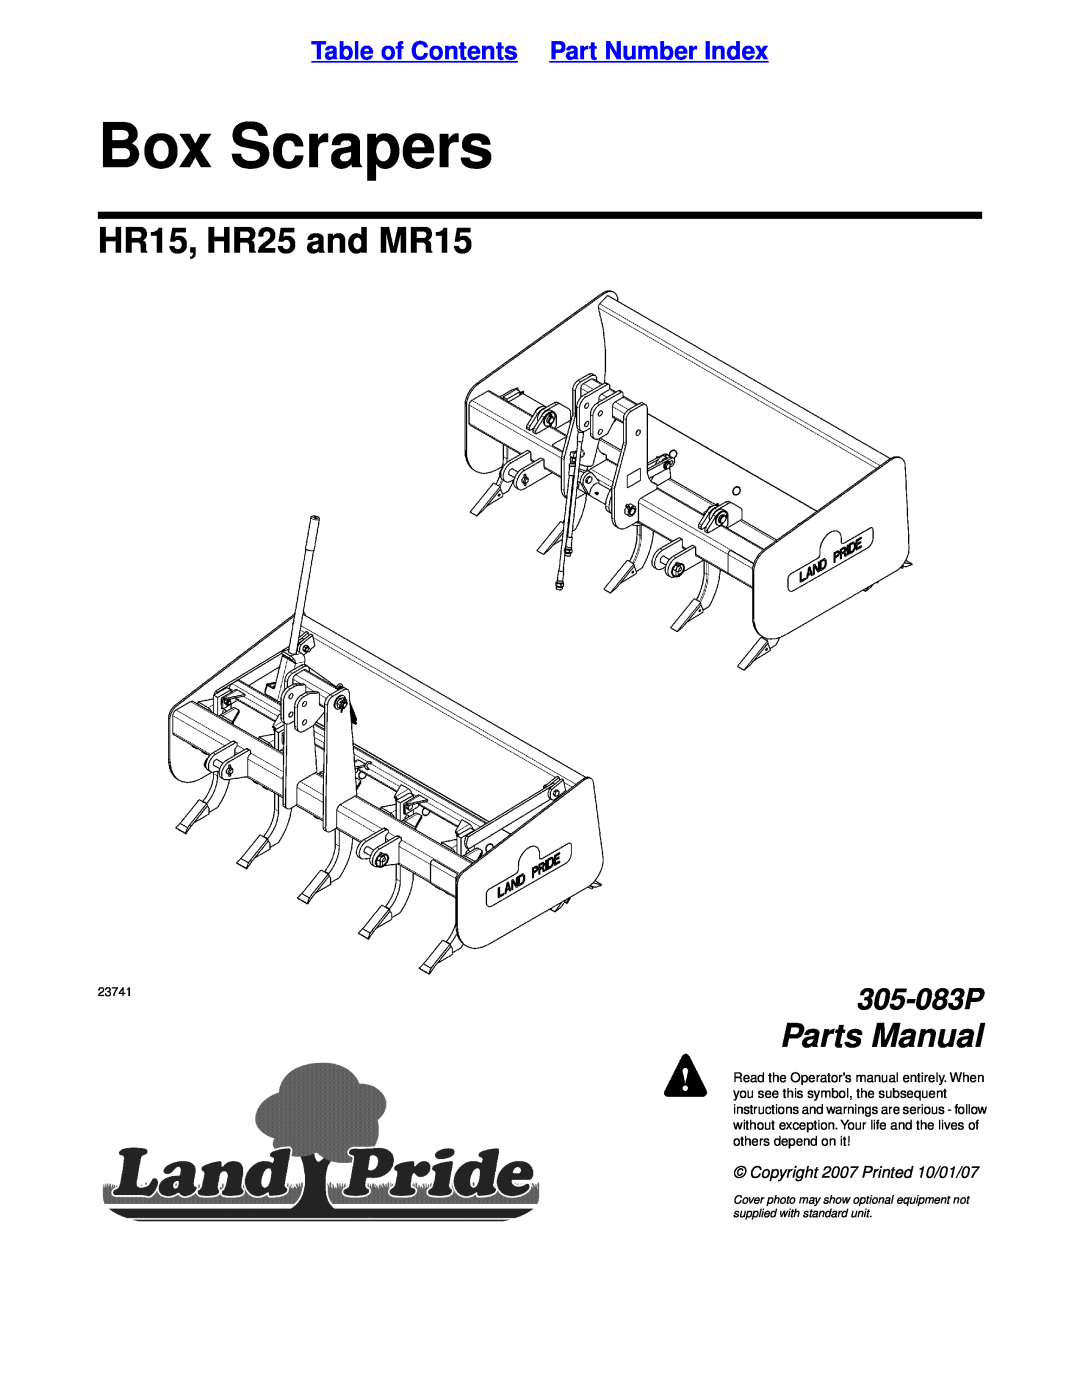 Land Pride manual Table of Contents Part Number Index, Box Scrapers, HR15, HR25 and MR15, Parts Manual, 305-083P 